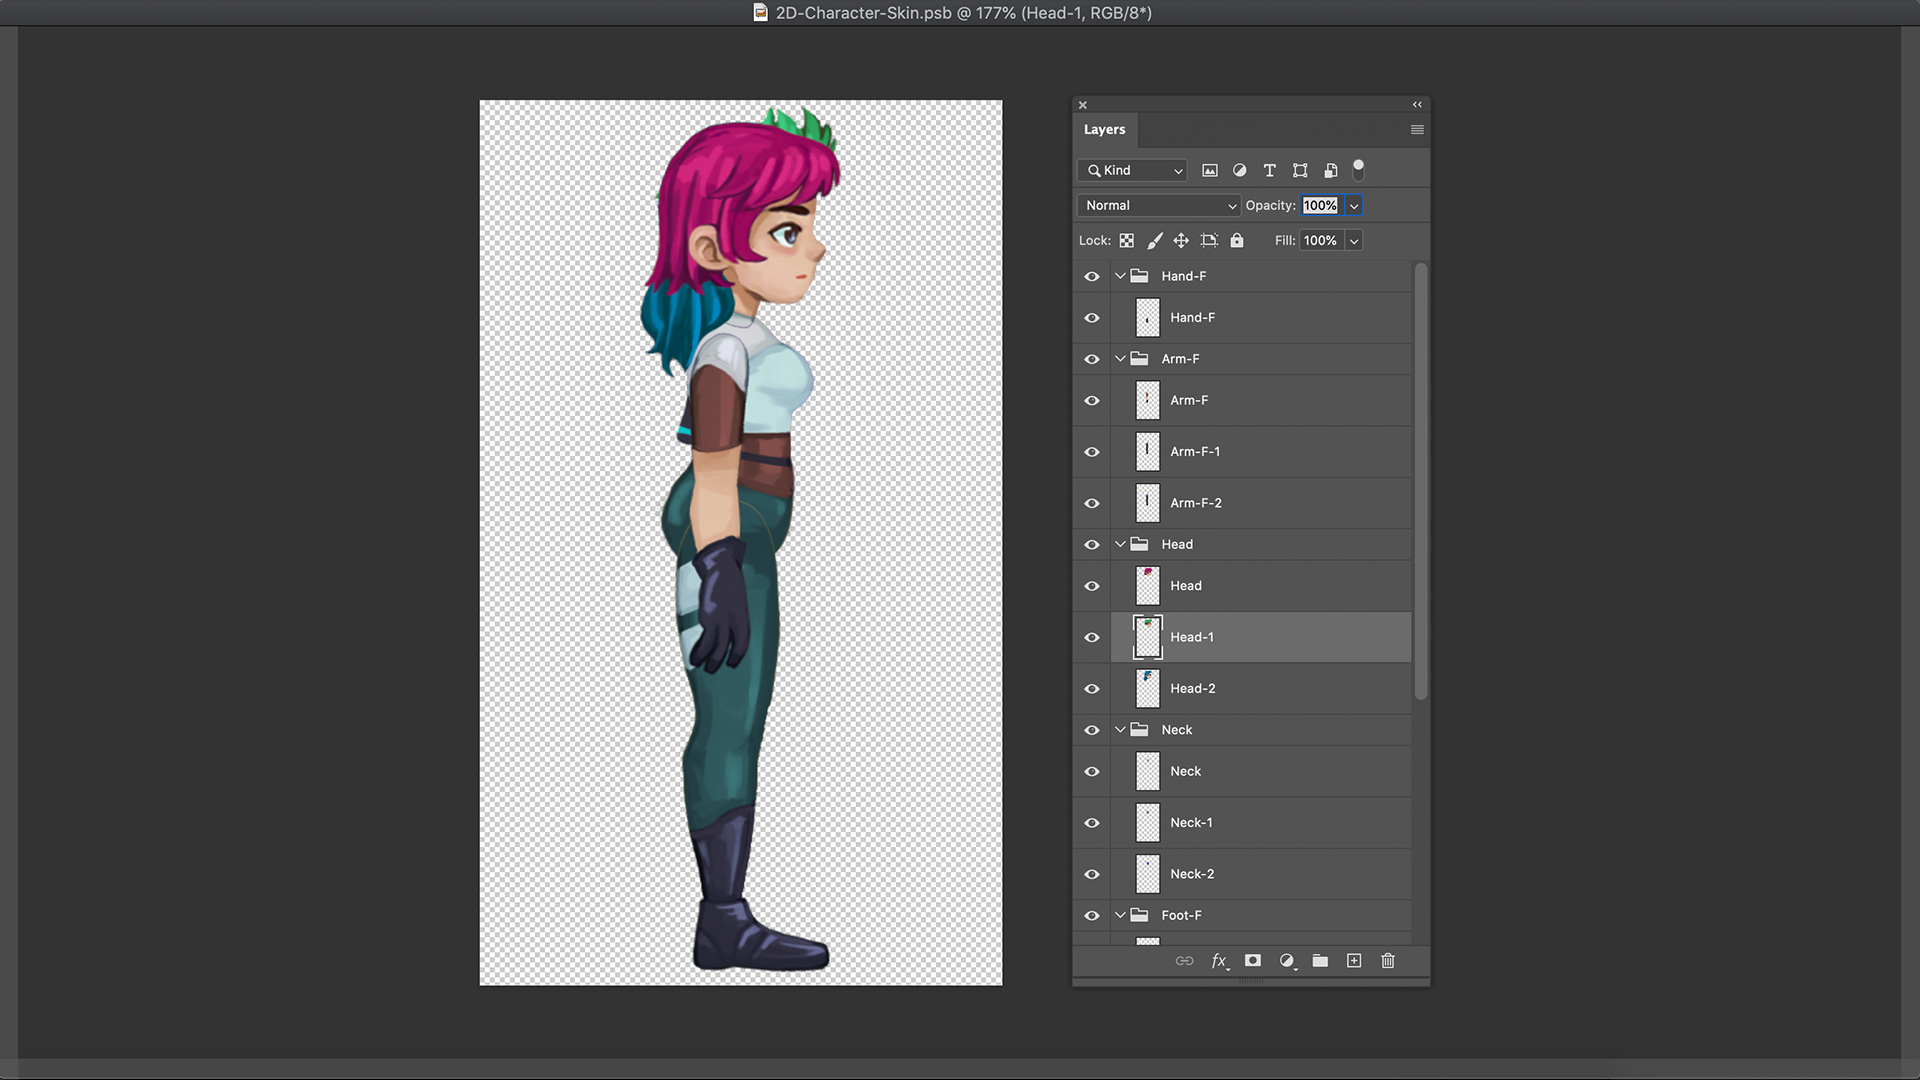 Unity 2D Animation – phtoshop file with skins